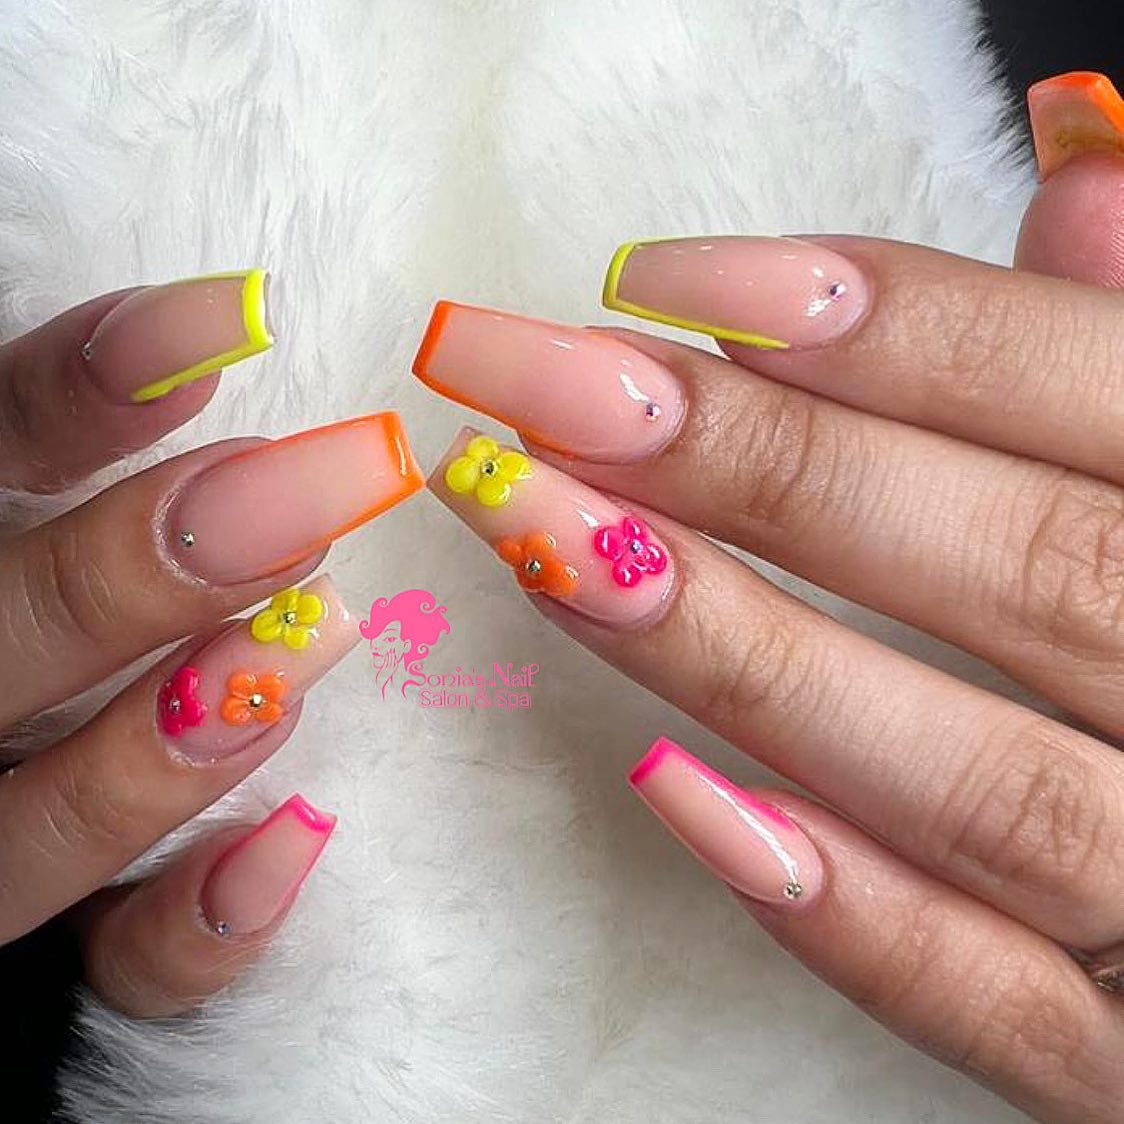 Spring nails and bolder nails such as these will look amazing on women who like fun neon colors.